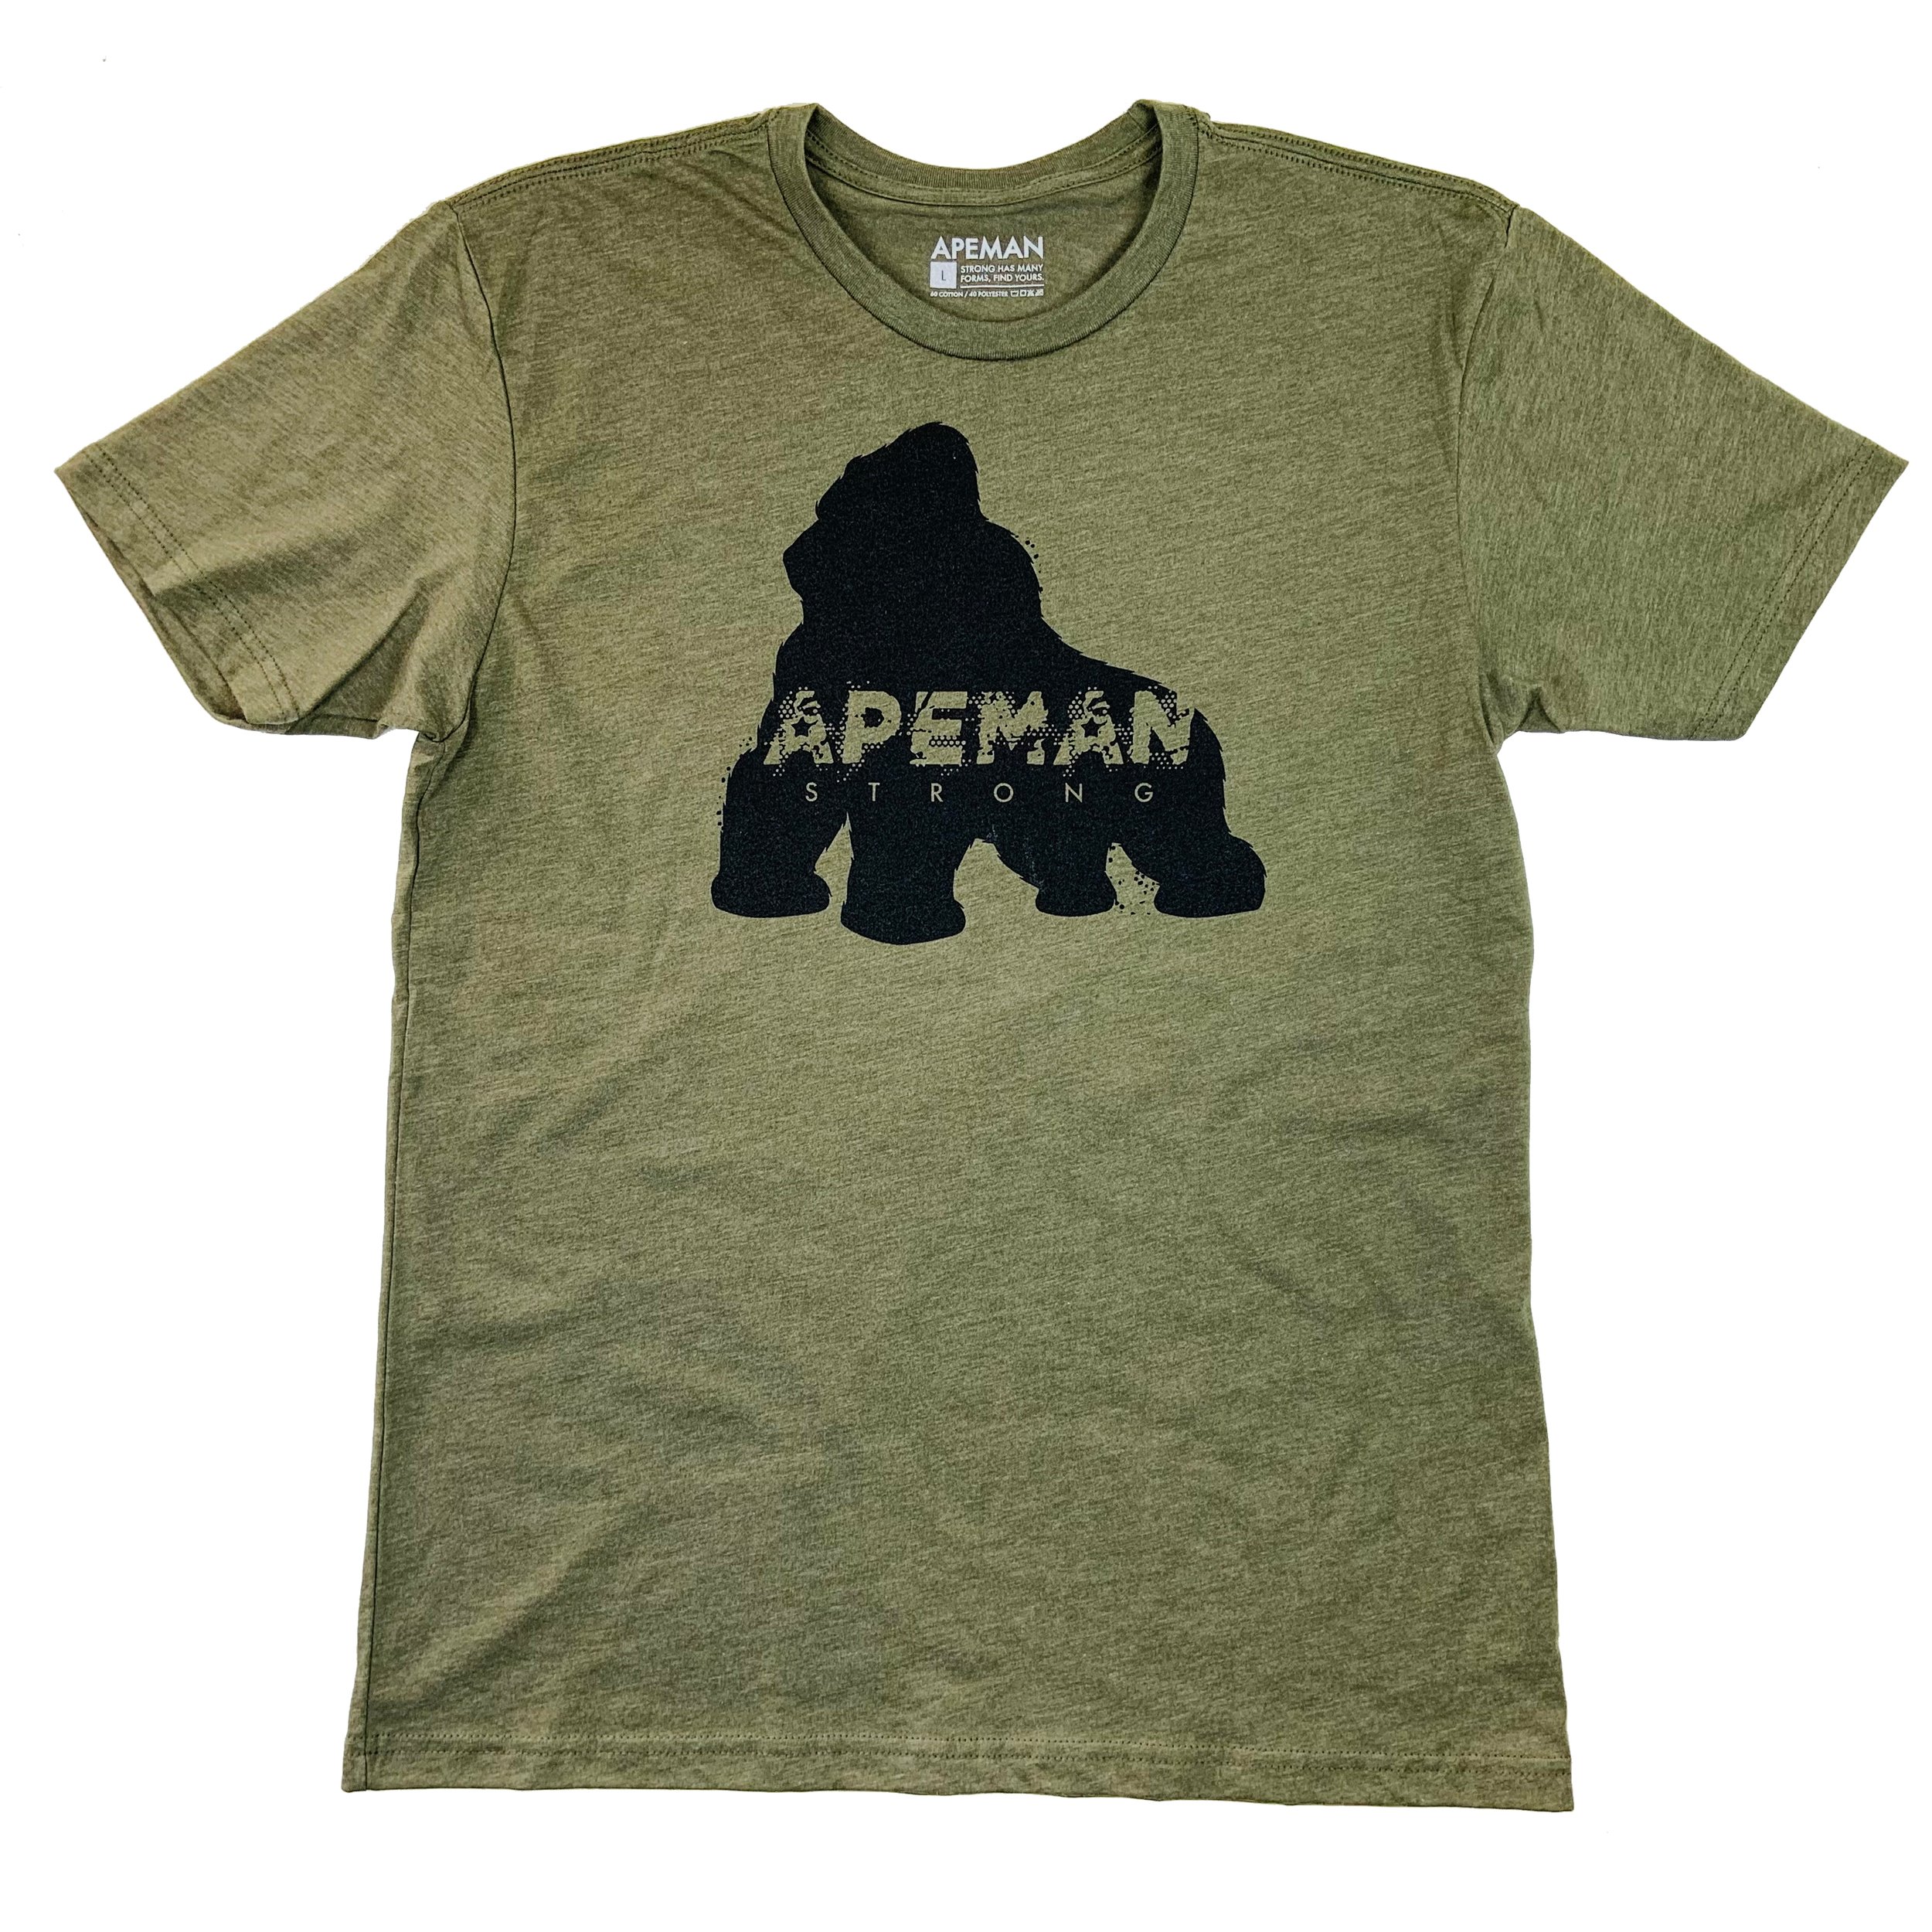 APEMAN STRONG Men's Workout Shirt - Athletic Tee Sold by Apeman Strong